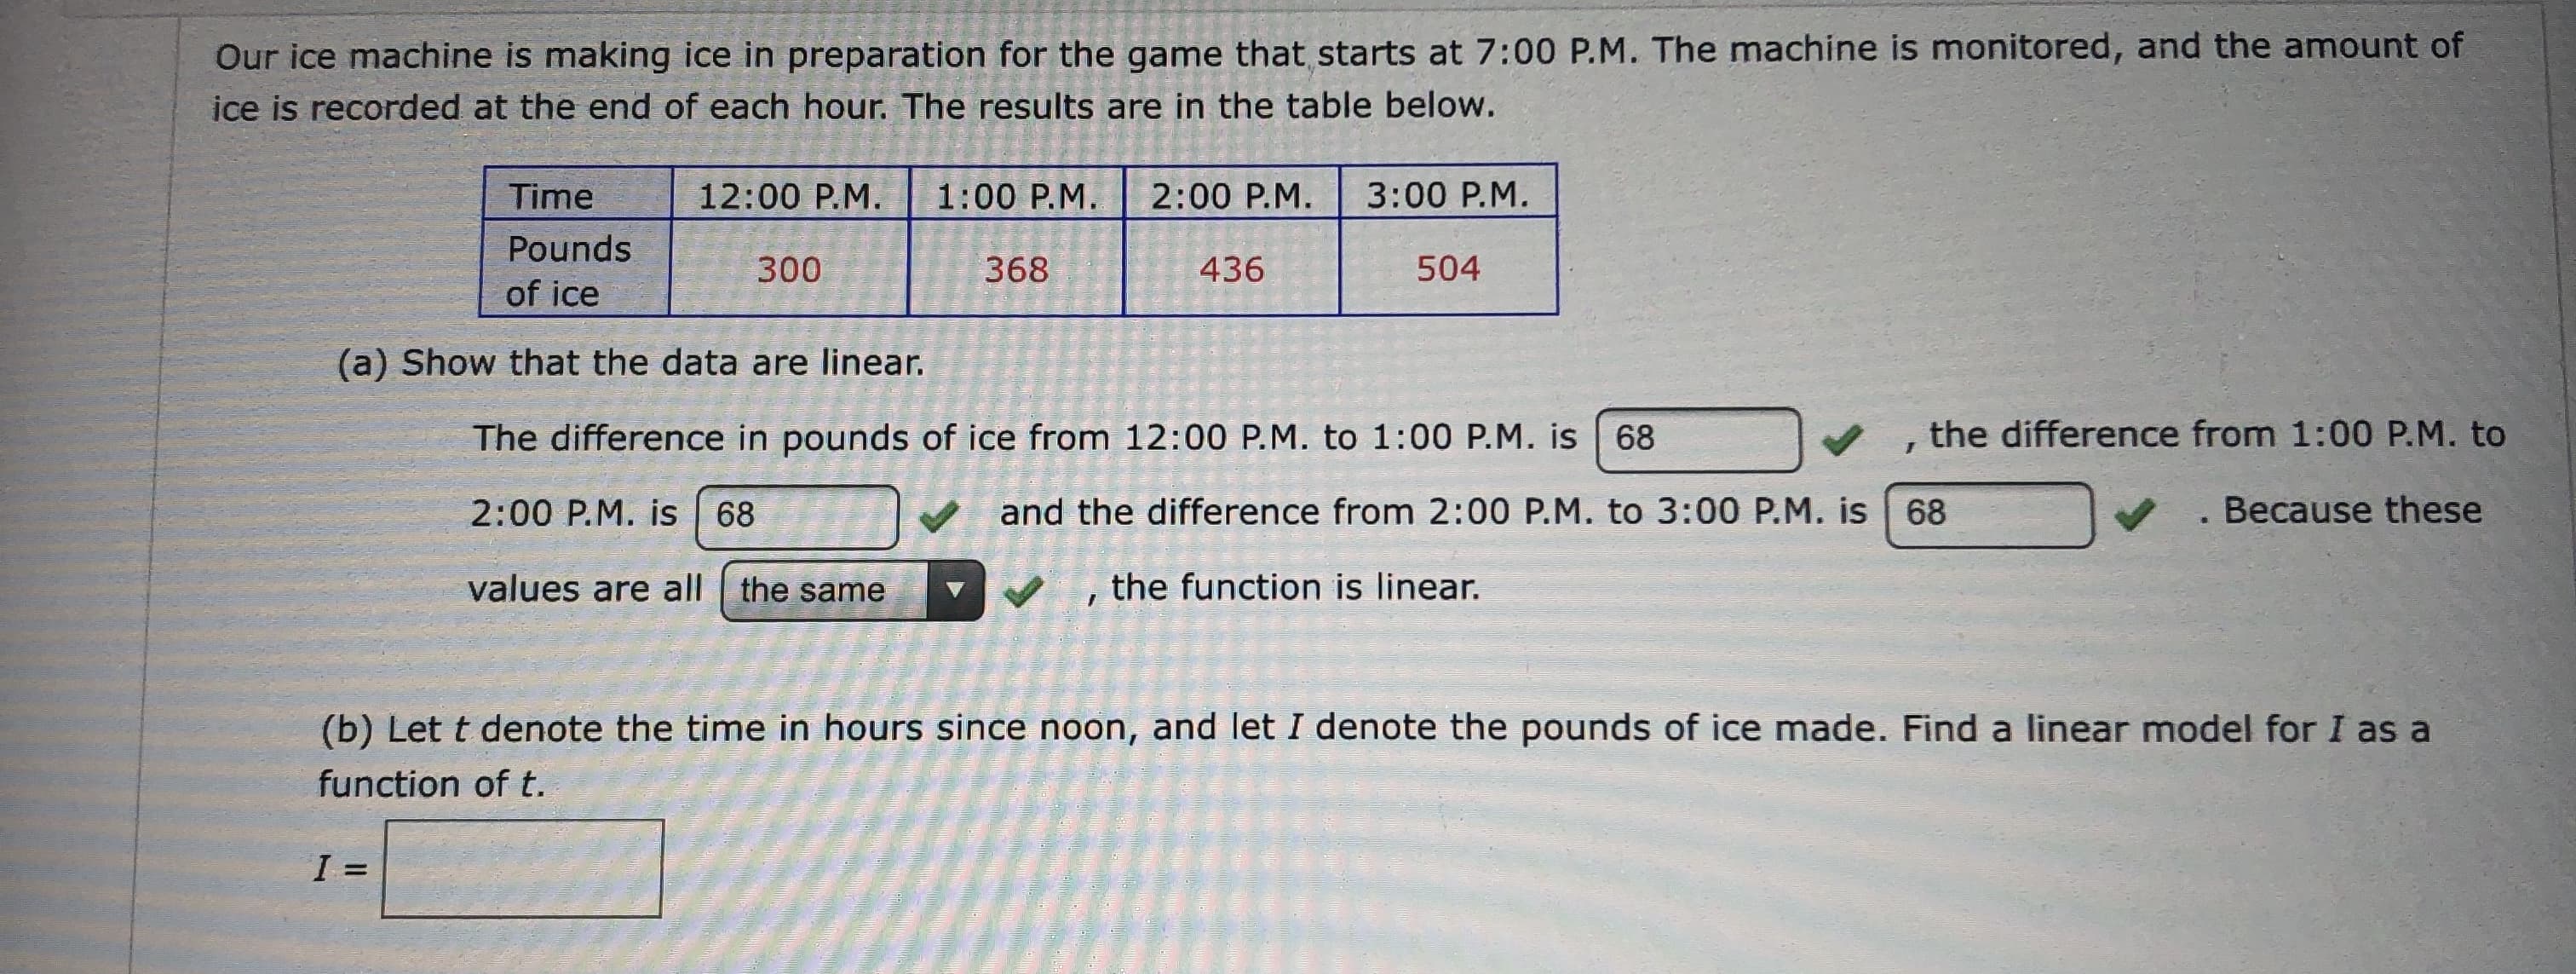 Our ice machine is making ice in preparation for the game that starts at 7:00 P.M. The machine is monitored, and the amount of
ice is recorded at the end of each hour. The results are in the table below.
3:00 P.M
1:00 P.M.
2:00 P.M.
Time
12:00 P.M.
Pounds
368
436
504
300
of ice
(a) Show that the data are linear.
the difference from 1:00 P.M. to
The difference in pounds of ice from 12:00 P.M. to 1:00 P.M. is
68
T
and the difference from 2:00 P.M. to 3:00 P.M. is 68
. Because these
2:00 P.M. is 68
the function is linear.
values are all the same
(b) Let t denote the time in hours since noon, and let I denote the pounds of ice made. Find a linear model for I as a
function of t.
I =
